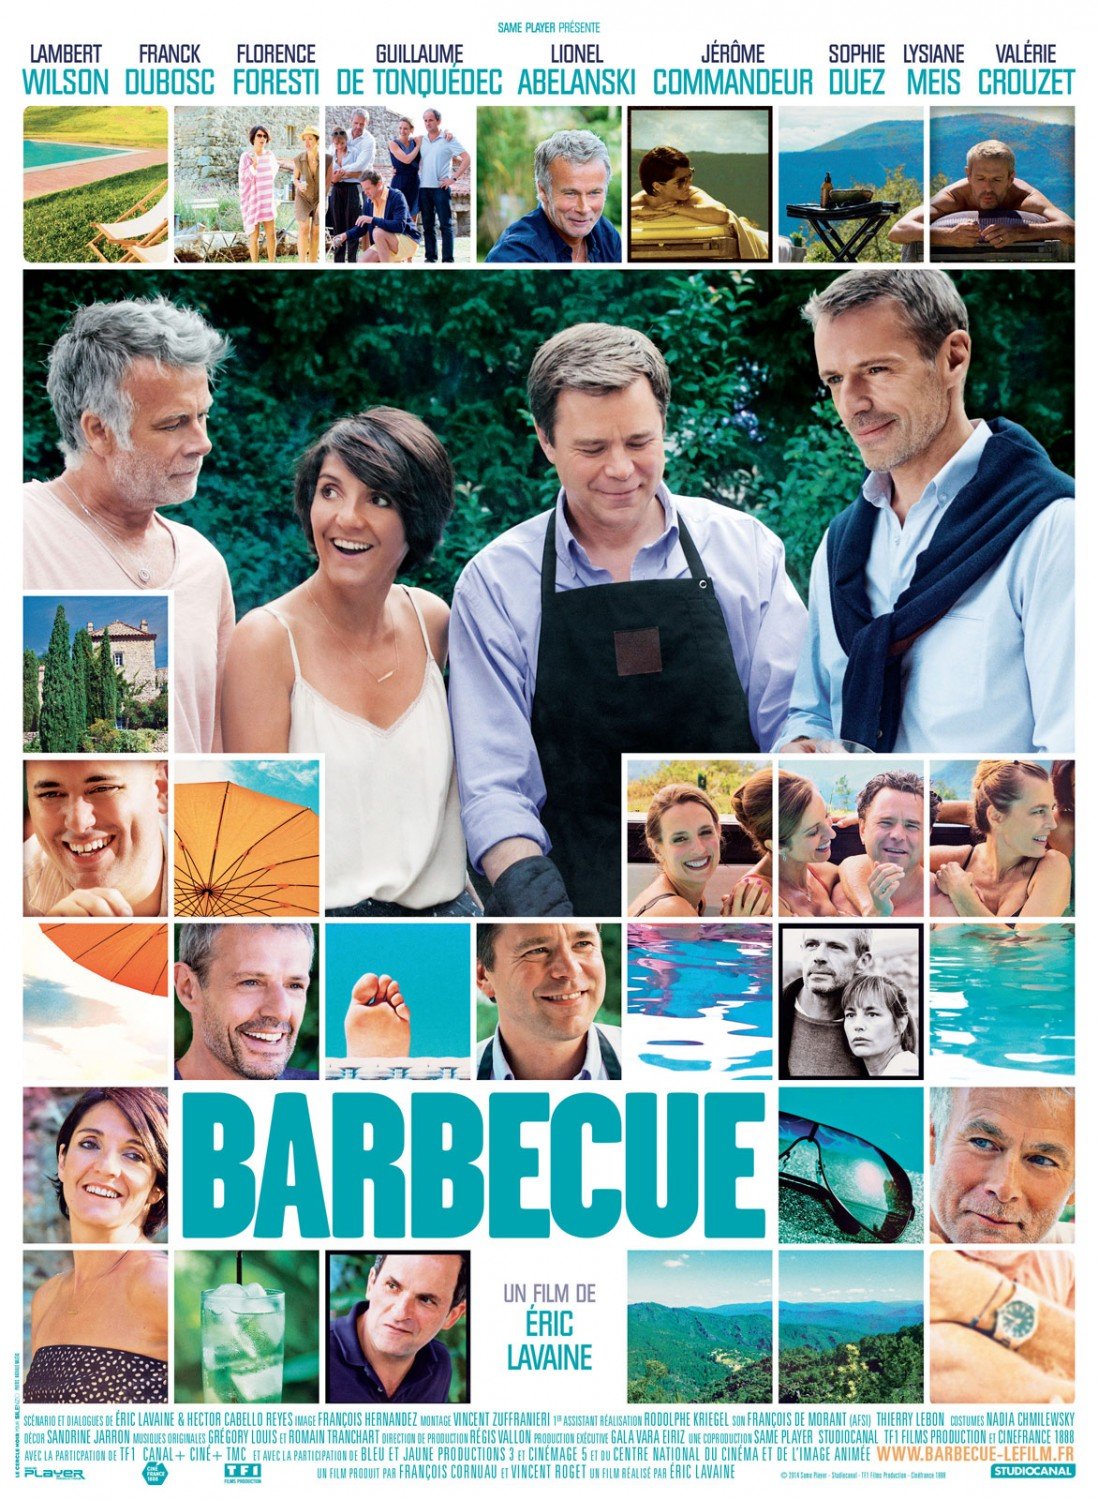 Poster of the movie Barbecue